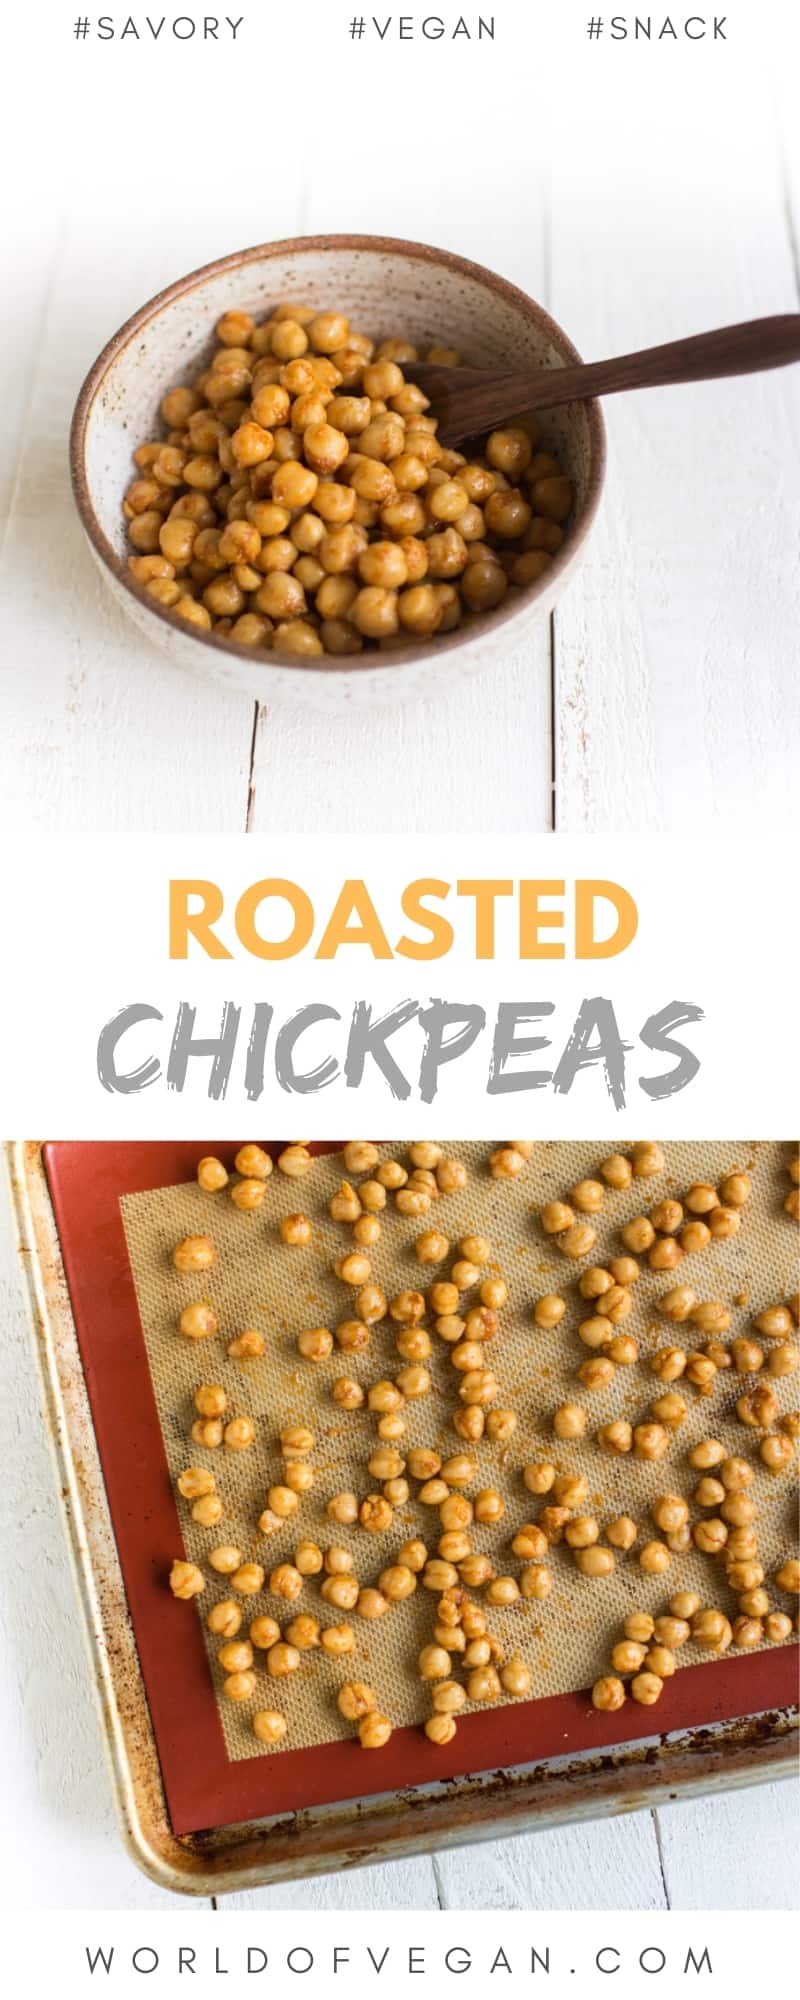 Delicious Savory Roasted Chickpeas 